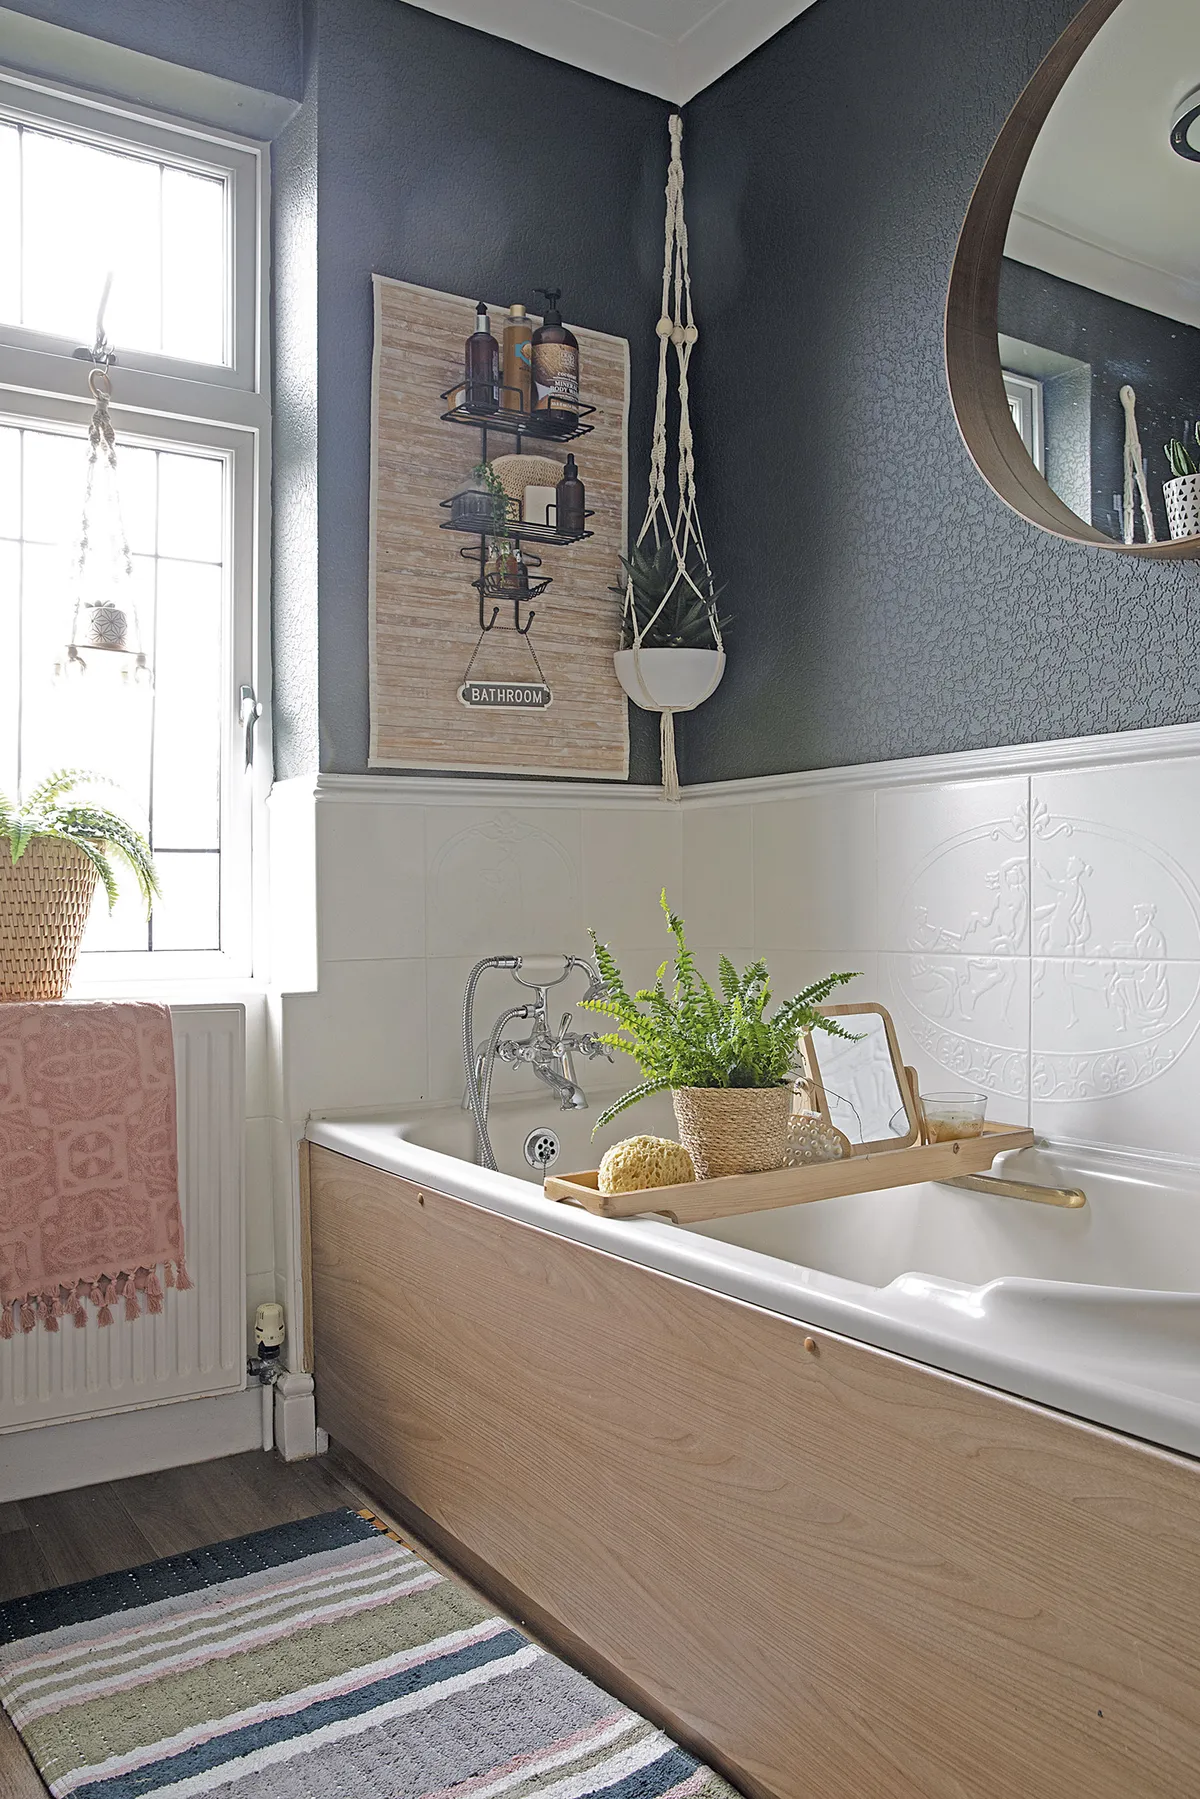 The old bathroom suite has been dressed up with an IKEA mirror, George Home bathmat and bath bridge. ‘To make a feature on the wall I created some storage using a spare bathmat and shower caddy,’ says Leanne